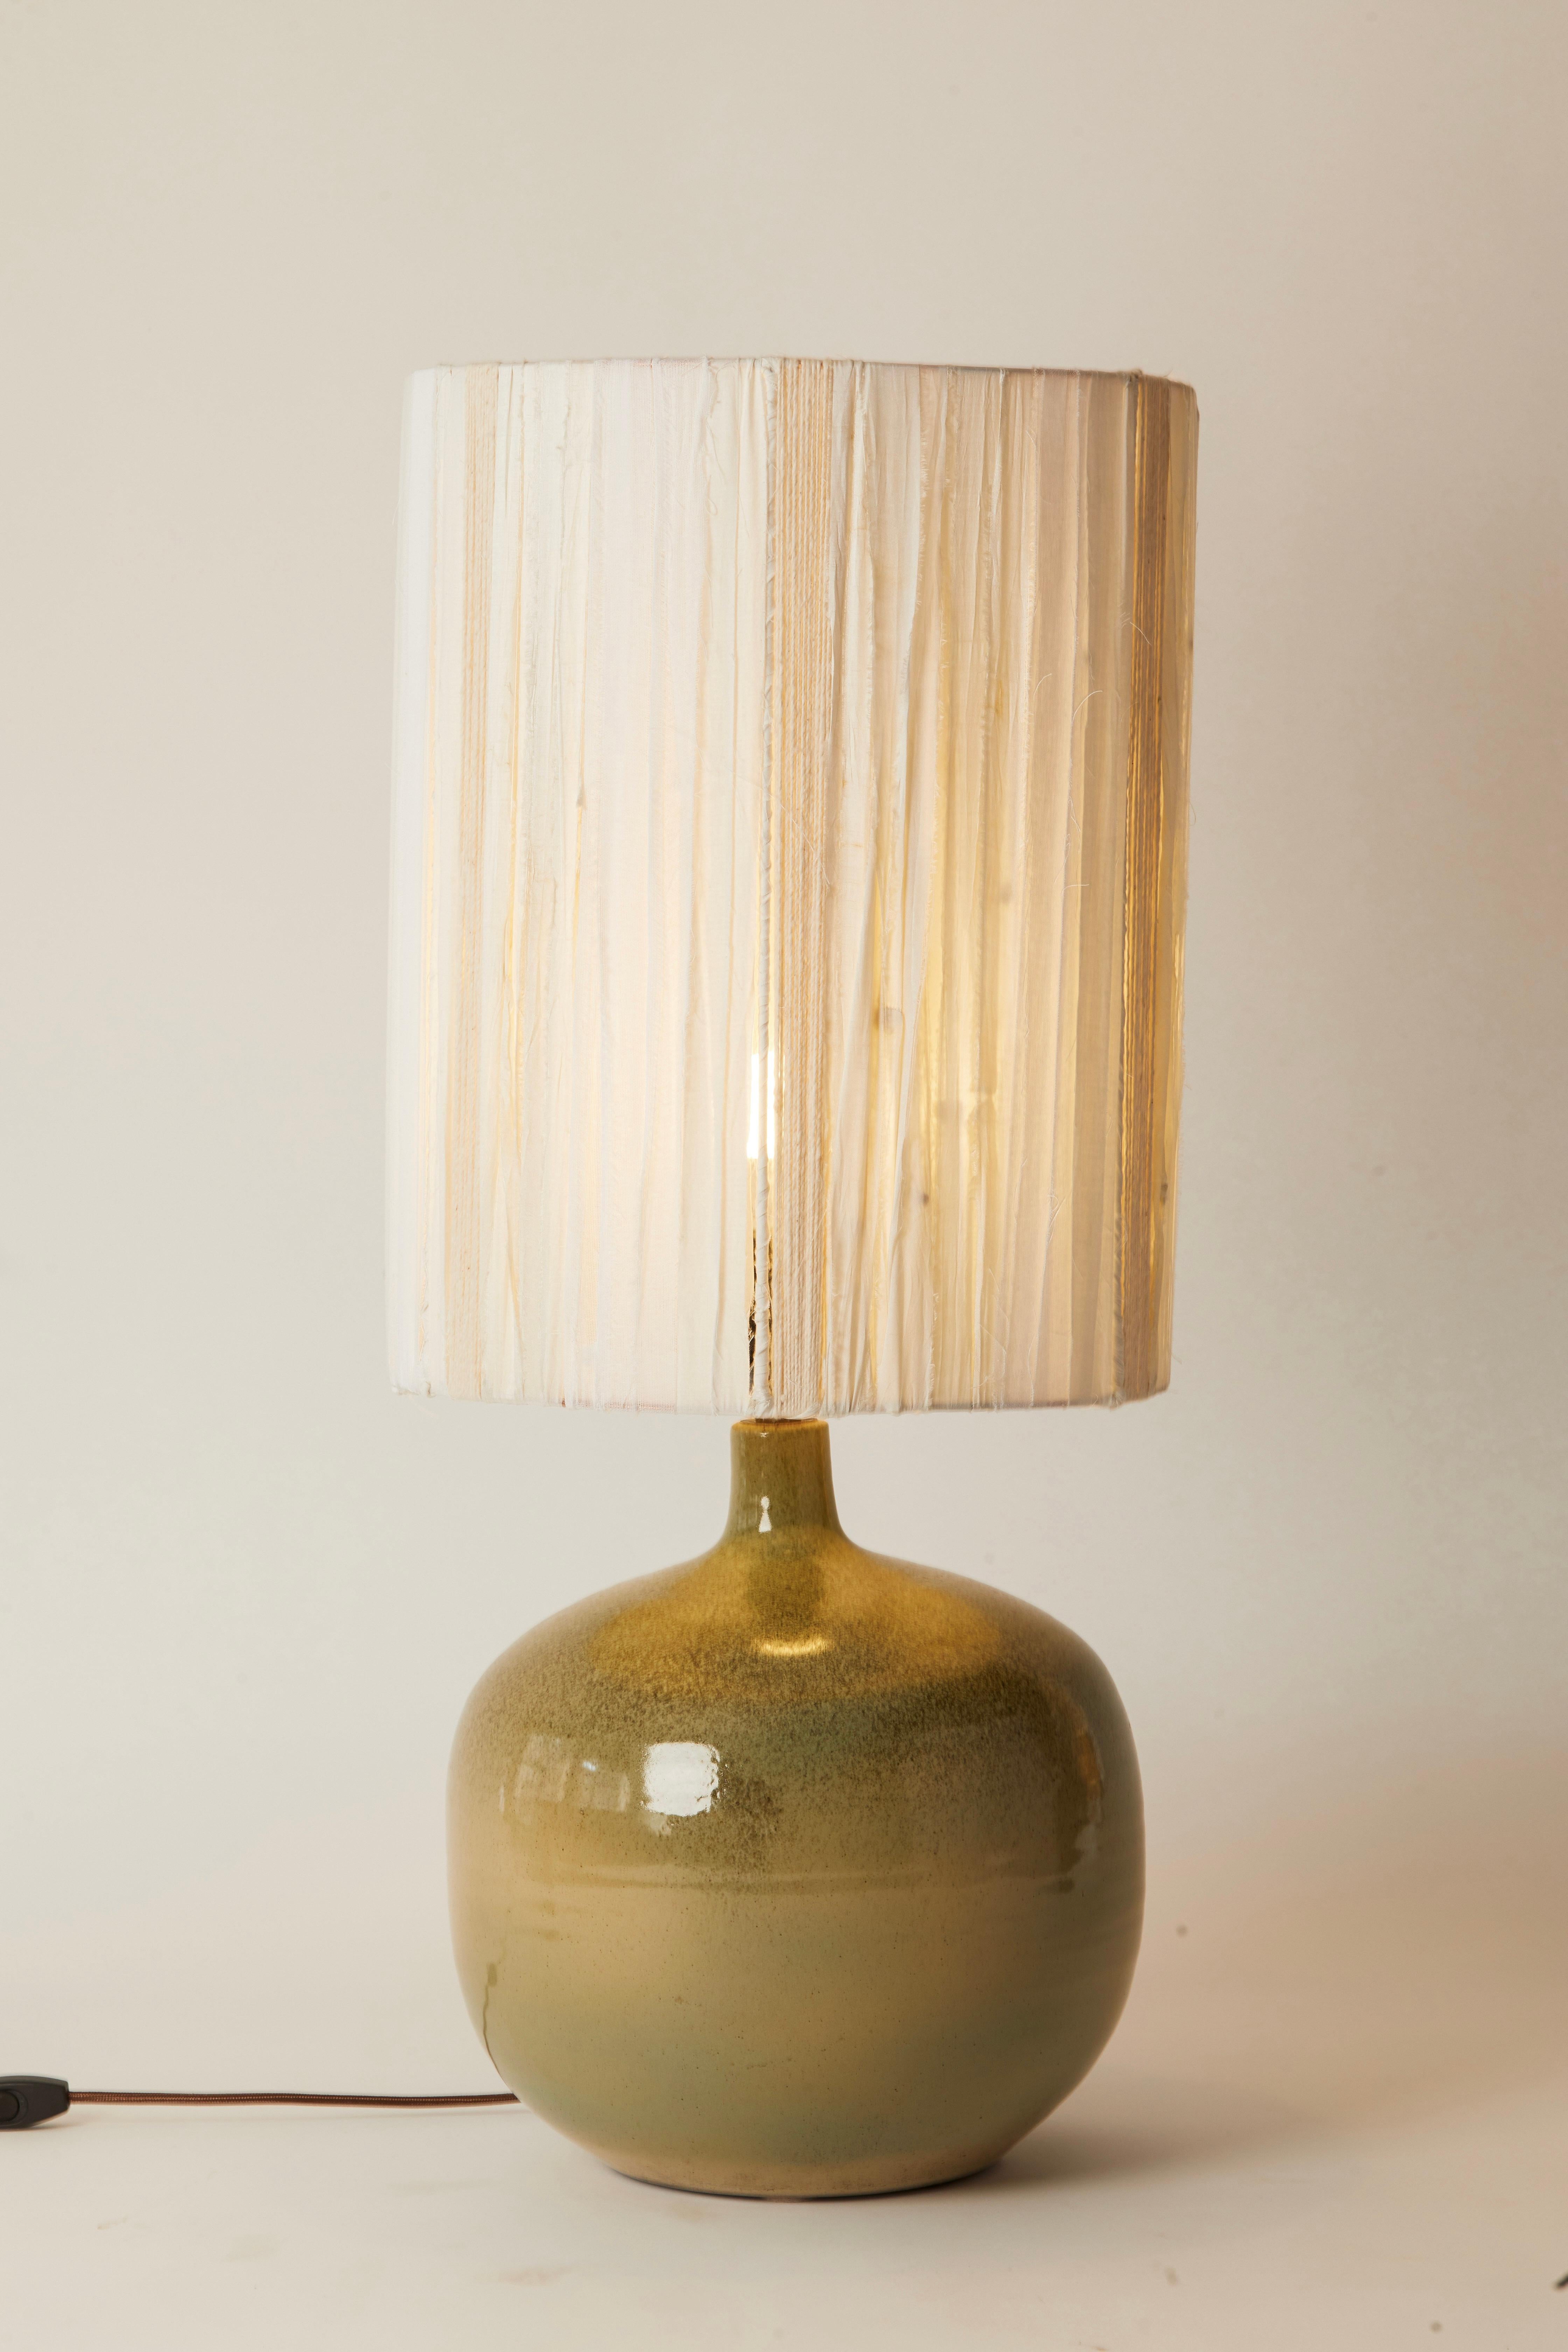 1950s French green speckled pottery lamp with coordinating ivory and brown rope shade. Strips of ivory fabric add dimension to the unique lampshade.